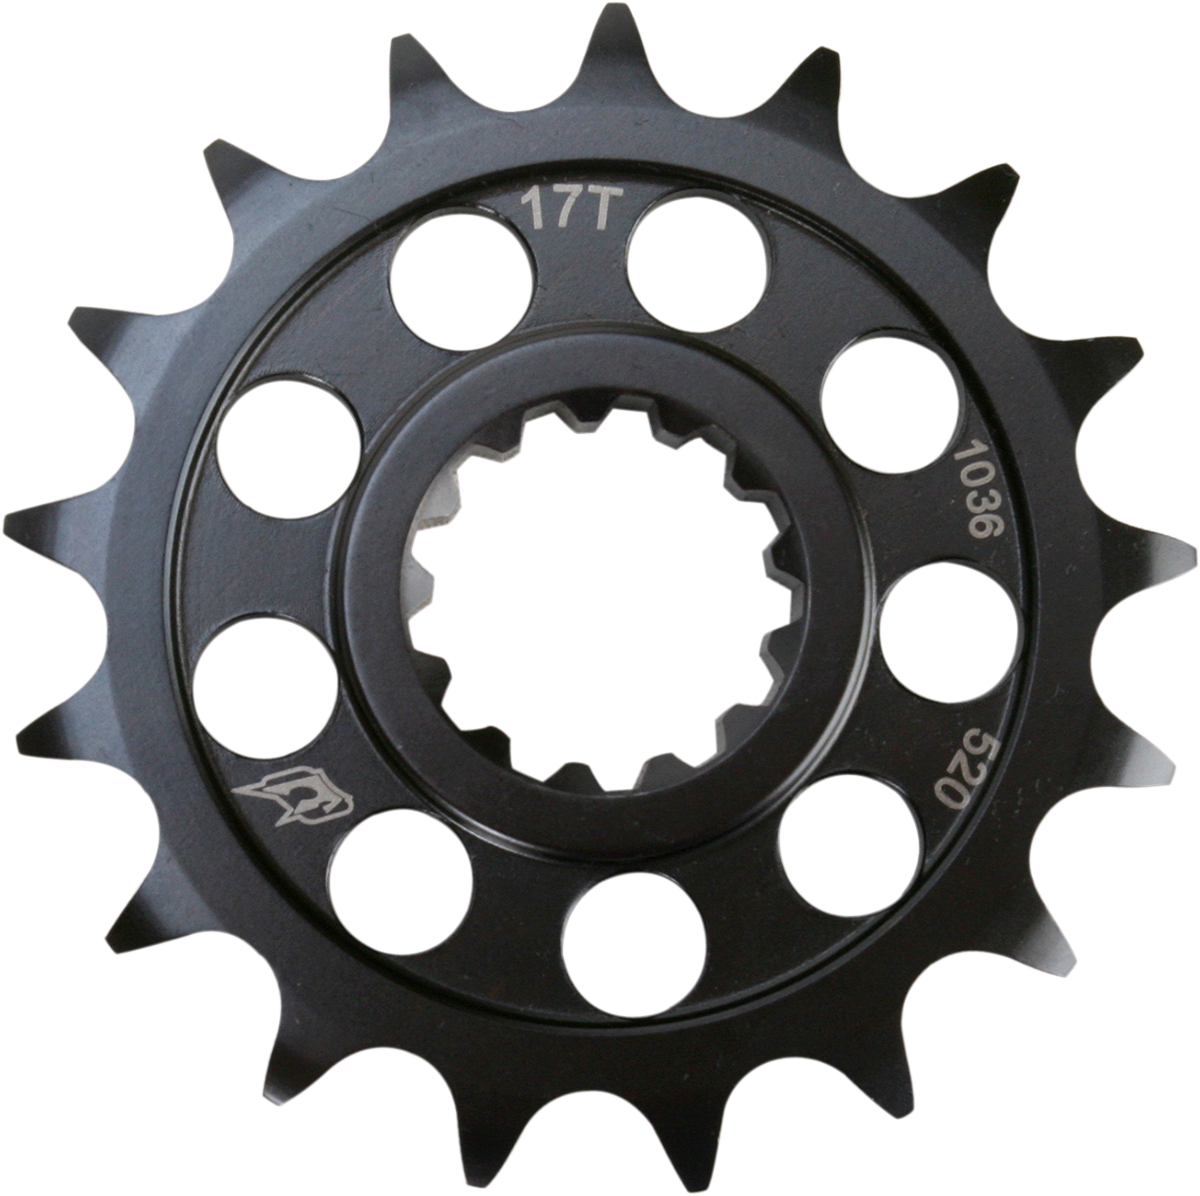 DRIVEN RACING Counter Shaft Sprocket - 17-Tooth 1036-520-17T